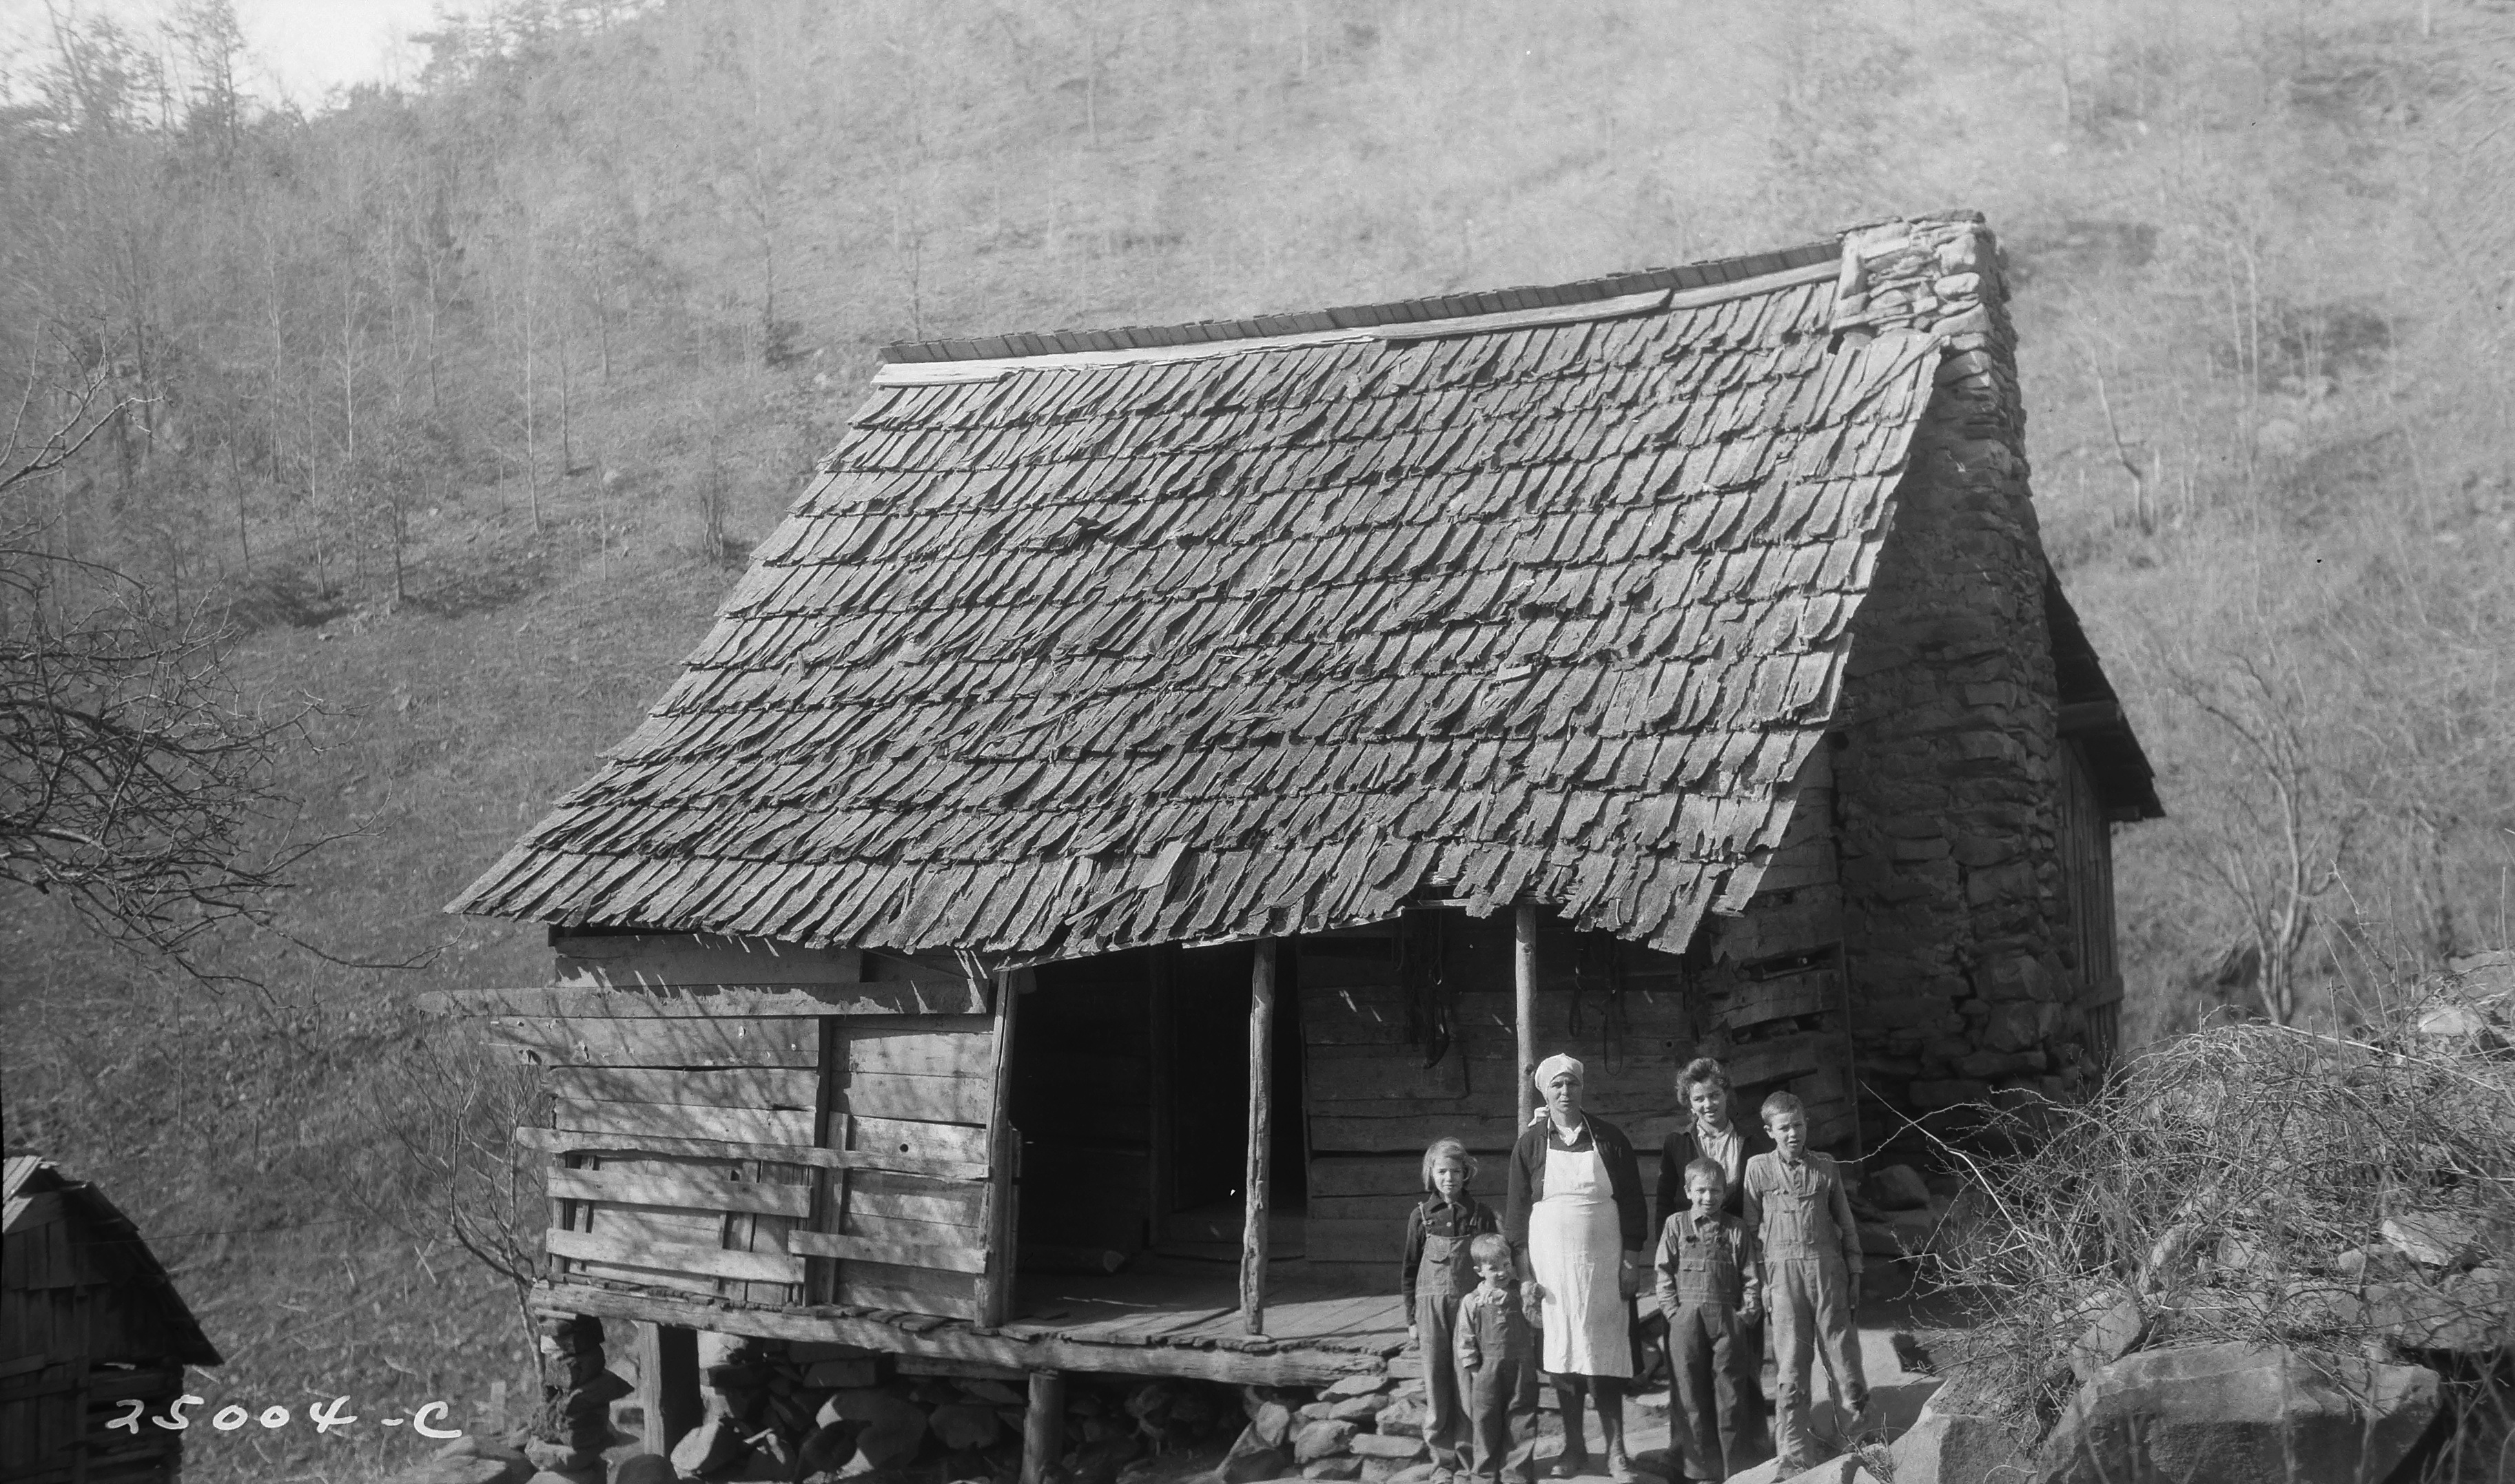 Black and white historic photo with a family of six people standing in front of a wooden home with a stone chimney.